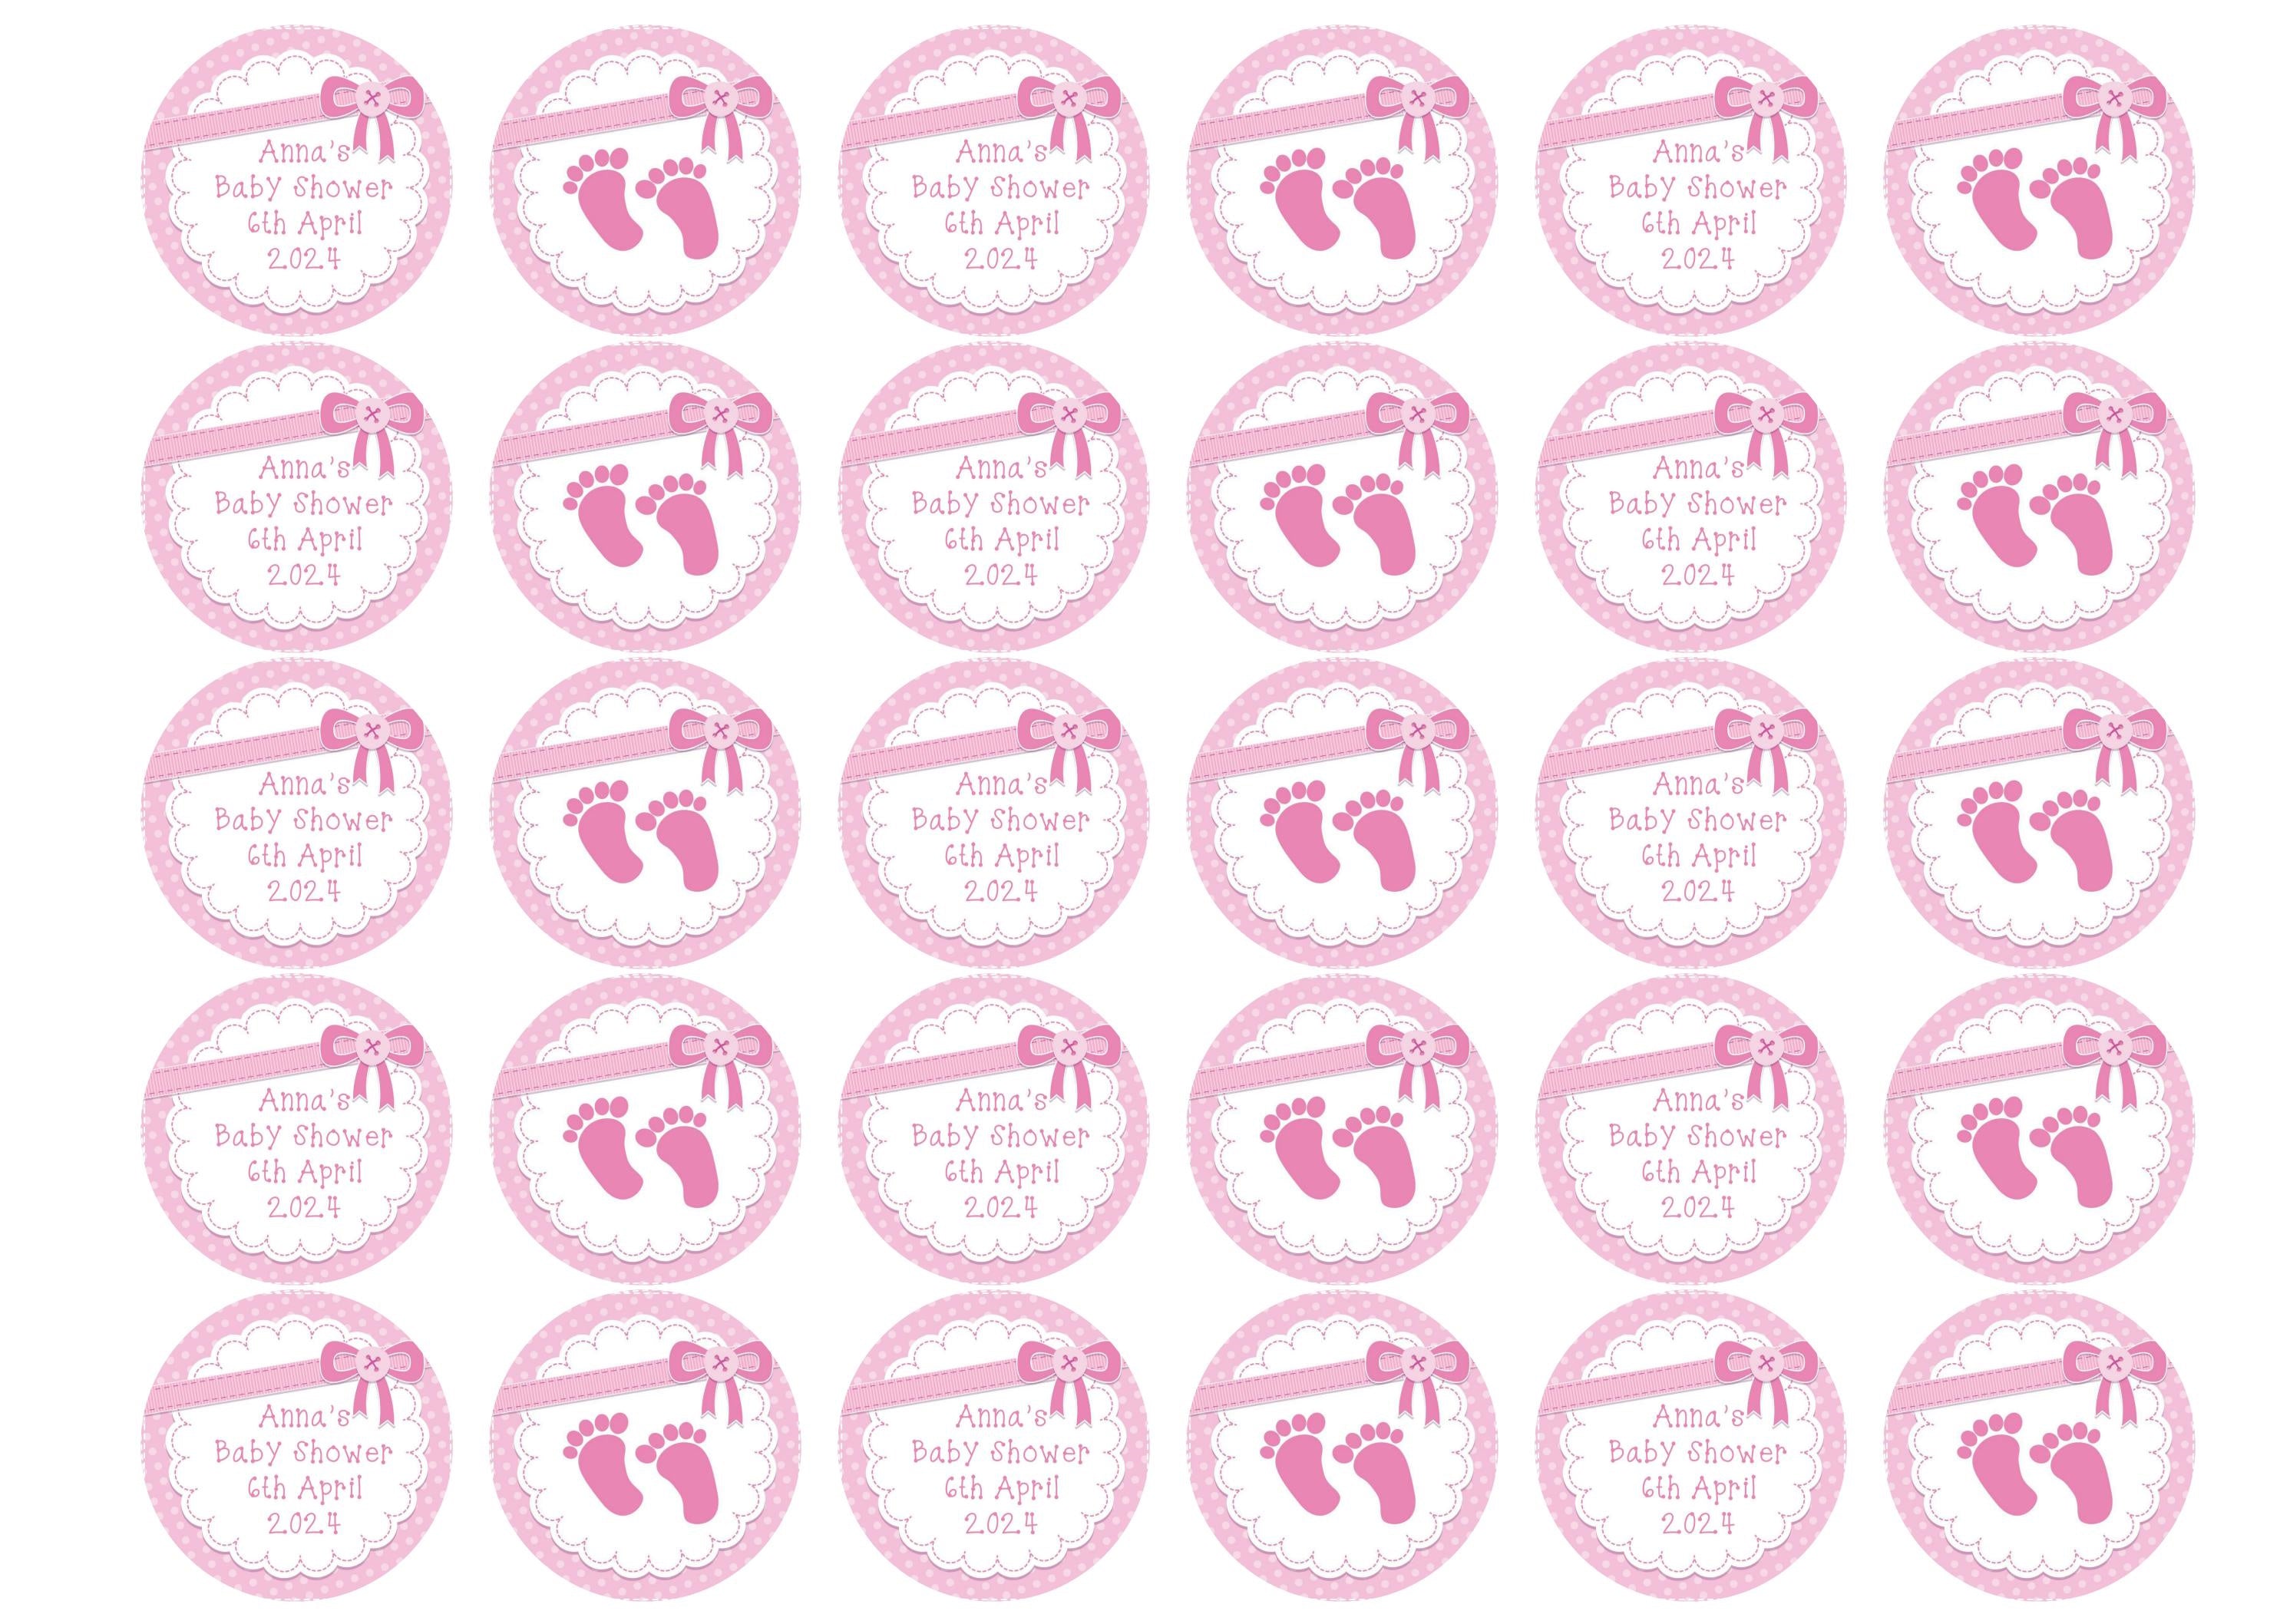 Pink personalised baby shower edible toppers